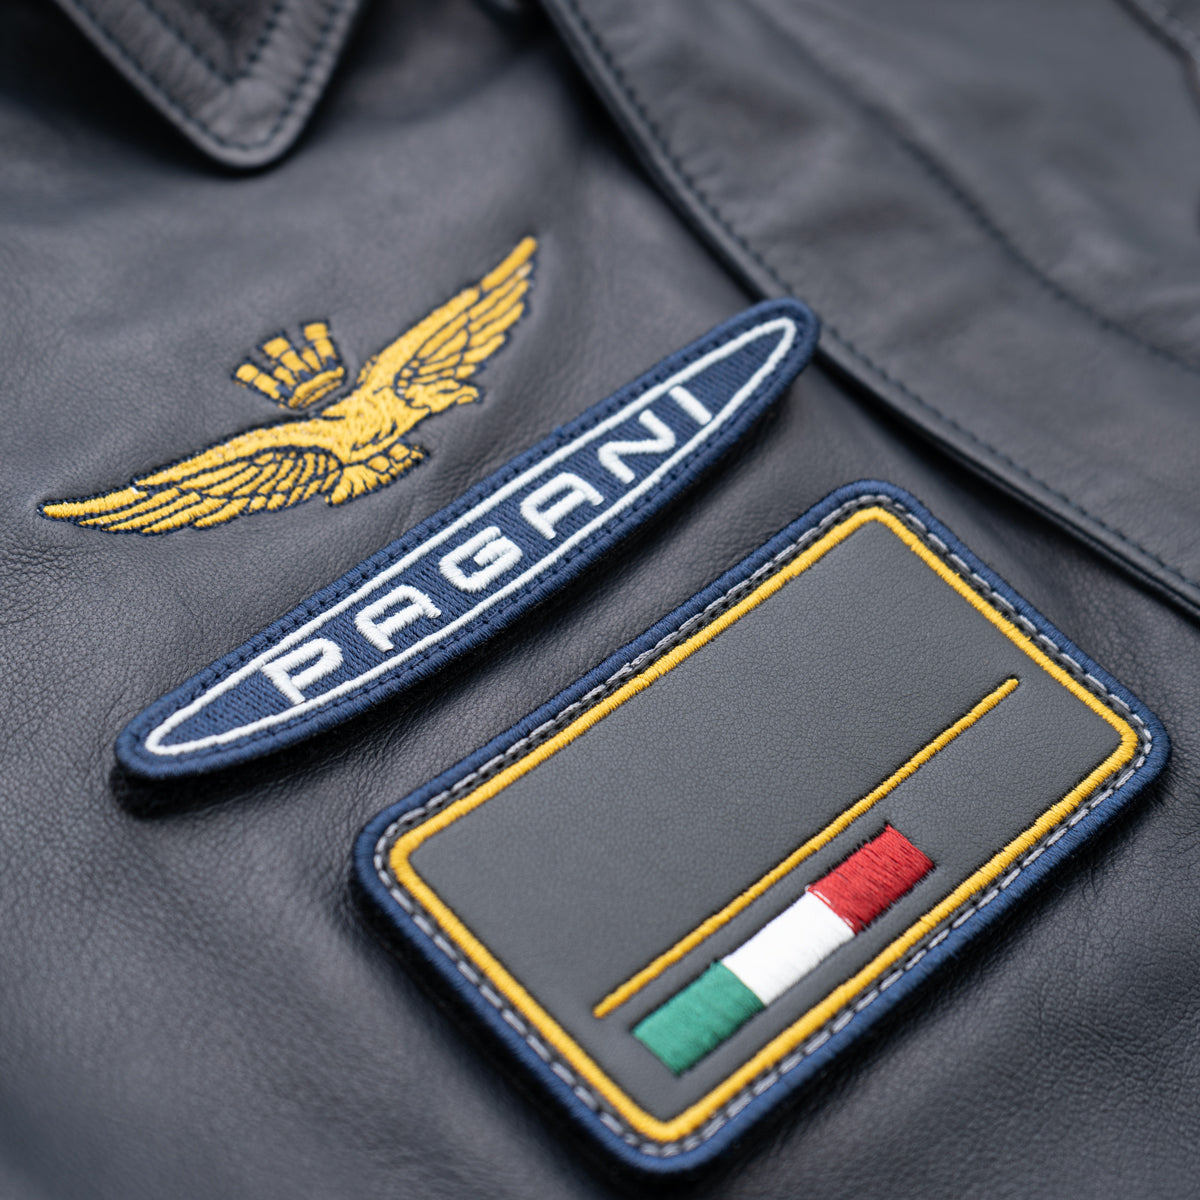 Leather Bomber Jacket | Huayra Tricolore Capsule